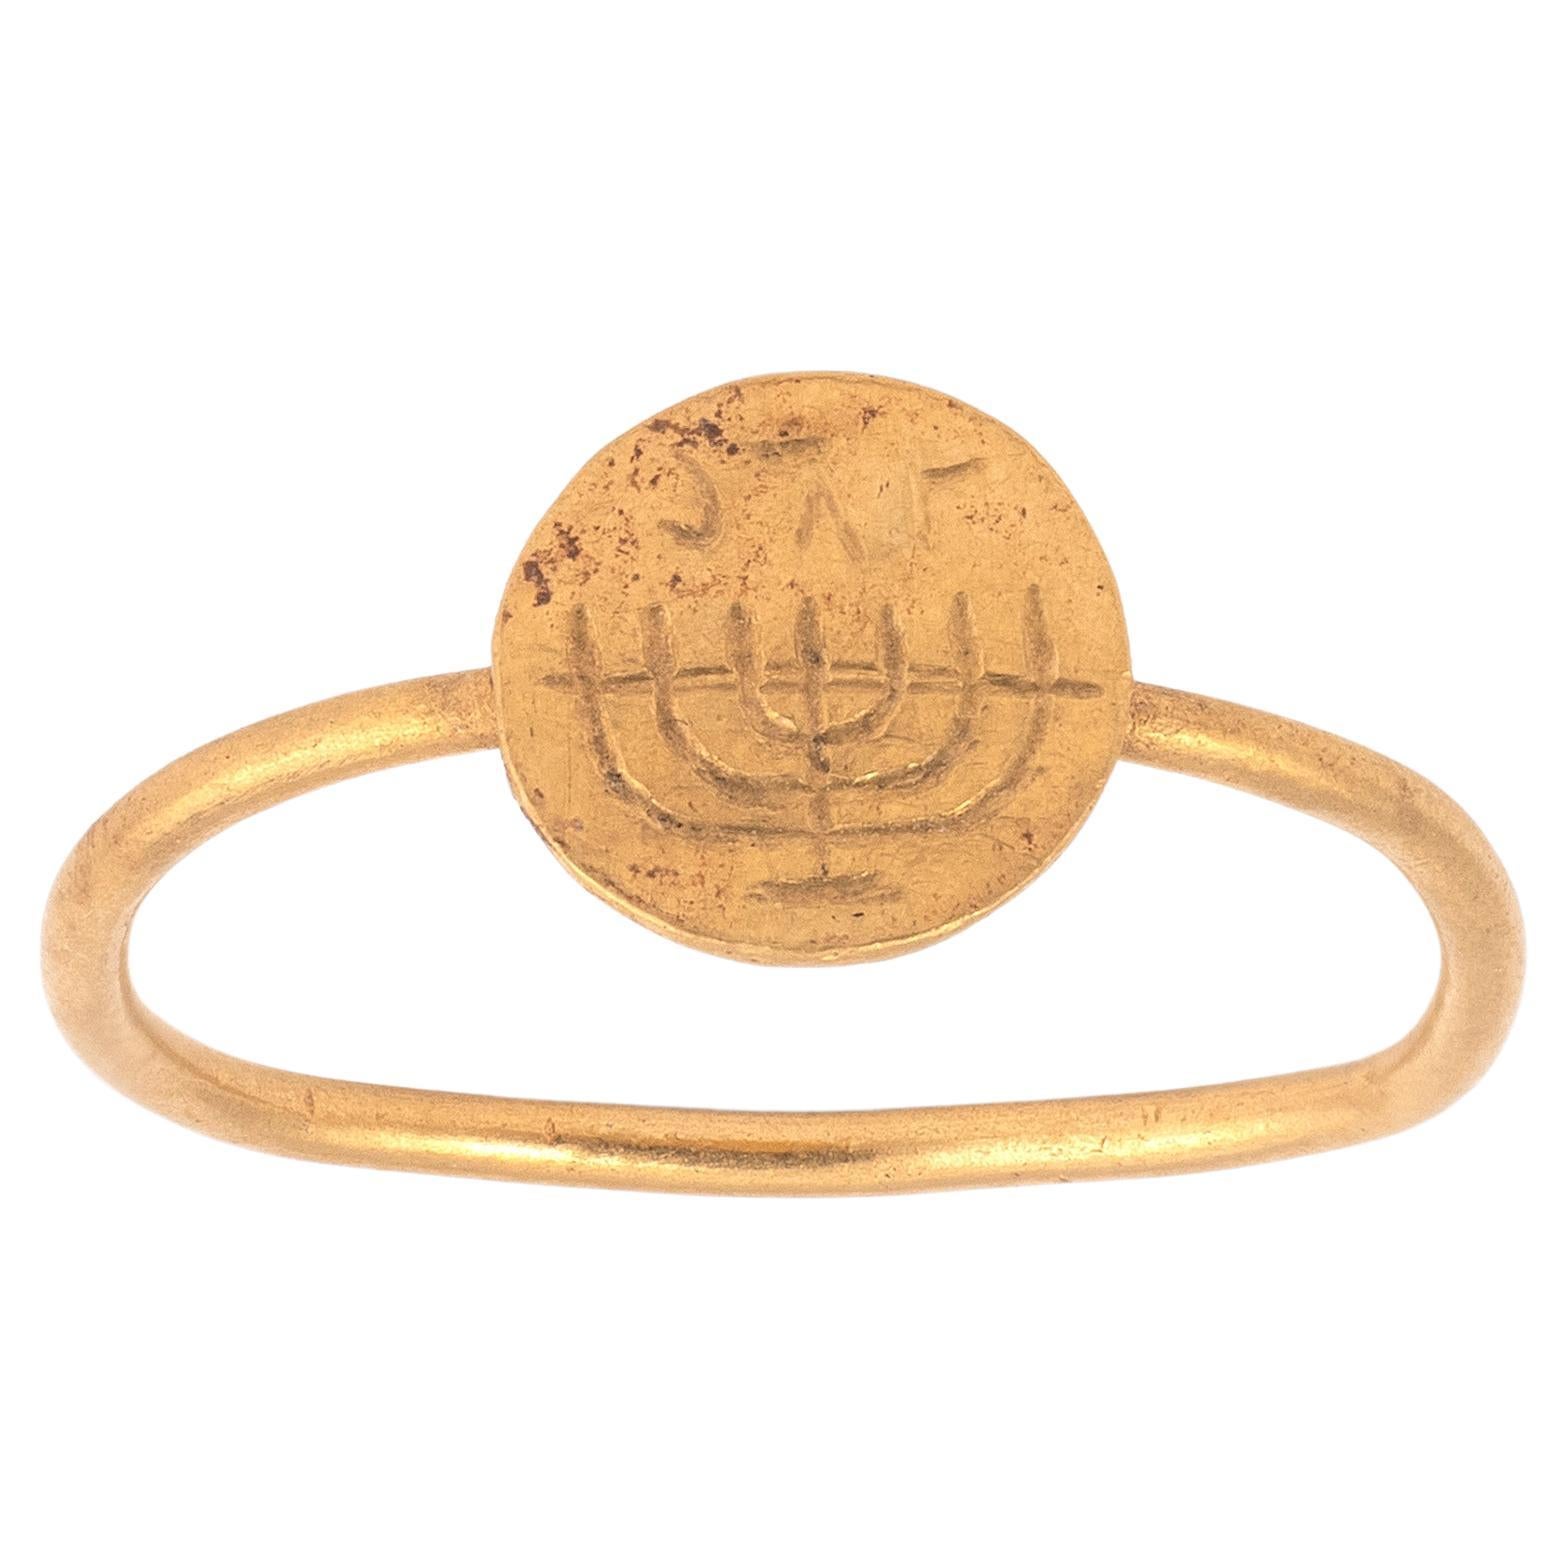 A Byzantine Gold Men's Ring With Jewish Menorah 6th-7th Century AD For Sale